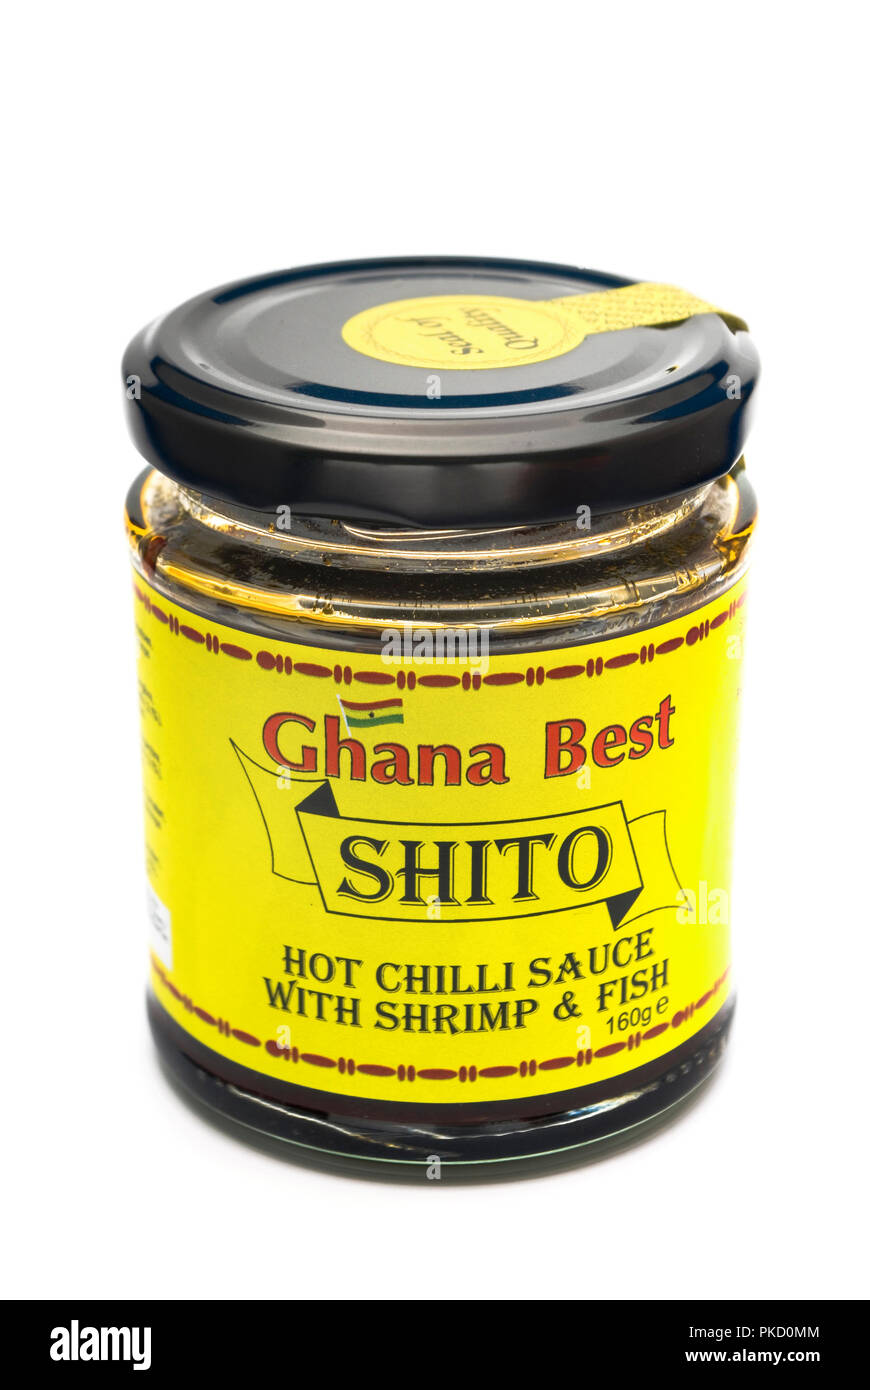 Ghana meilleure sauce Chili chaud Shito Banque D'Images